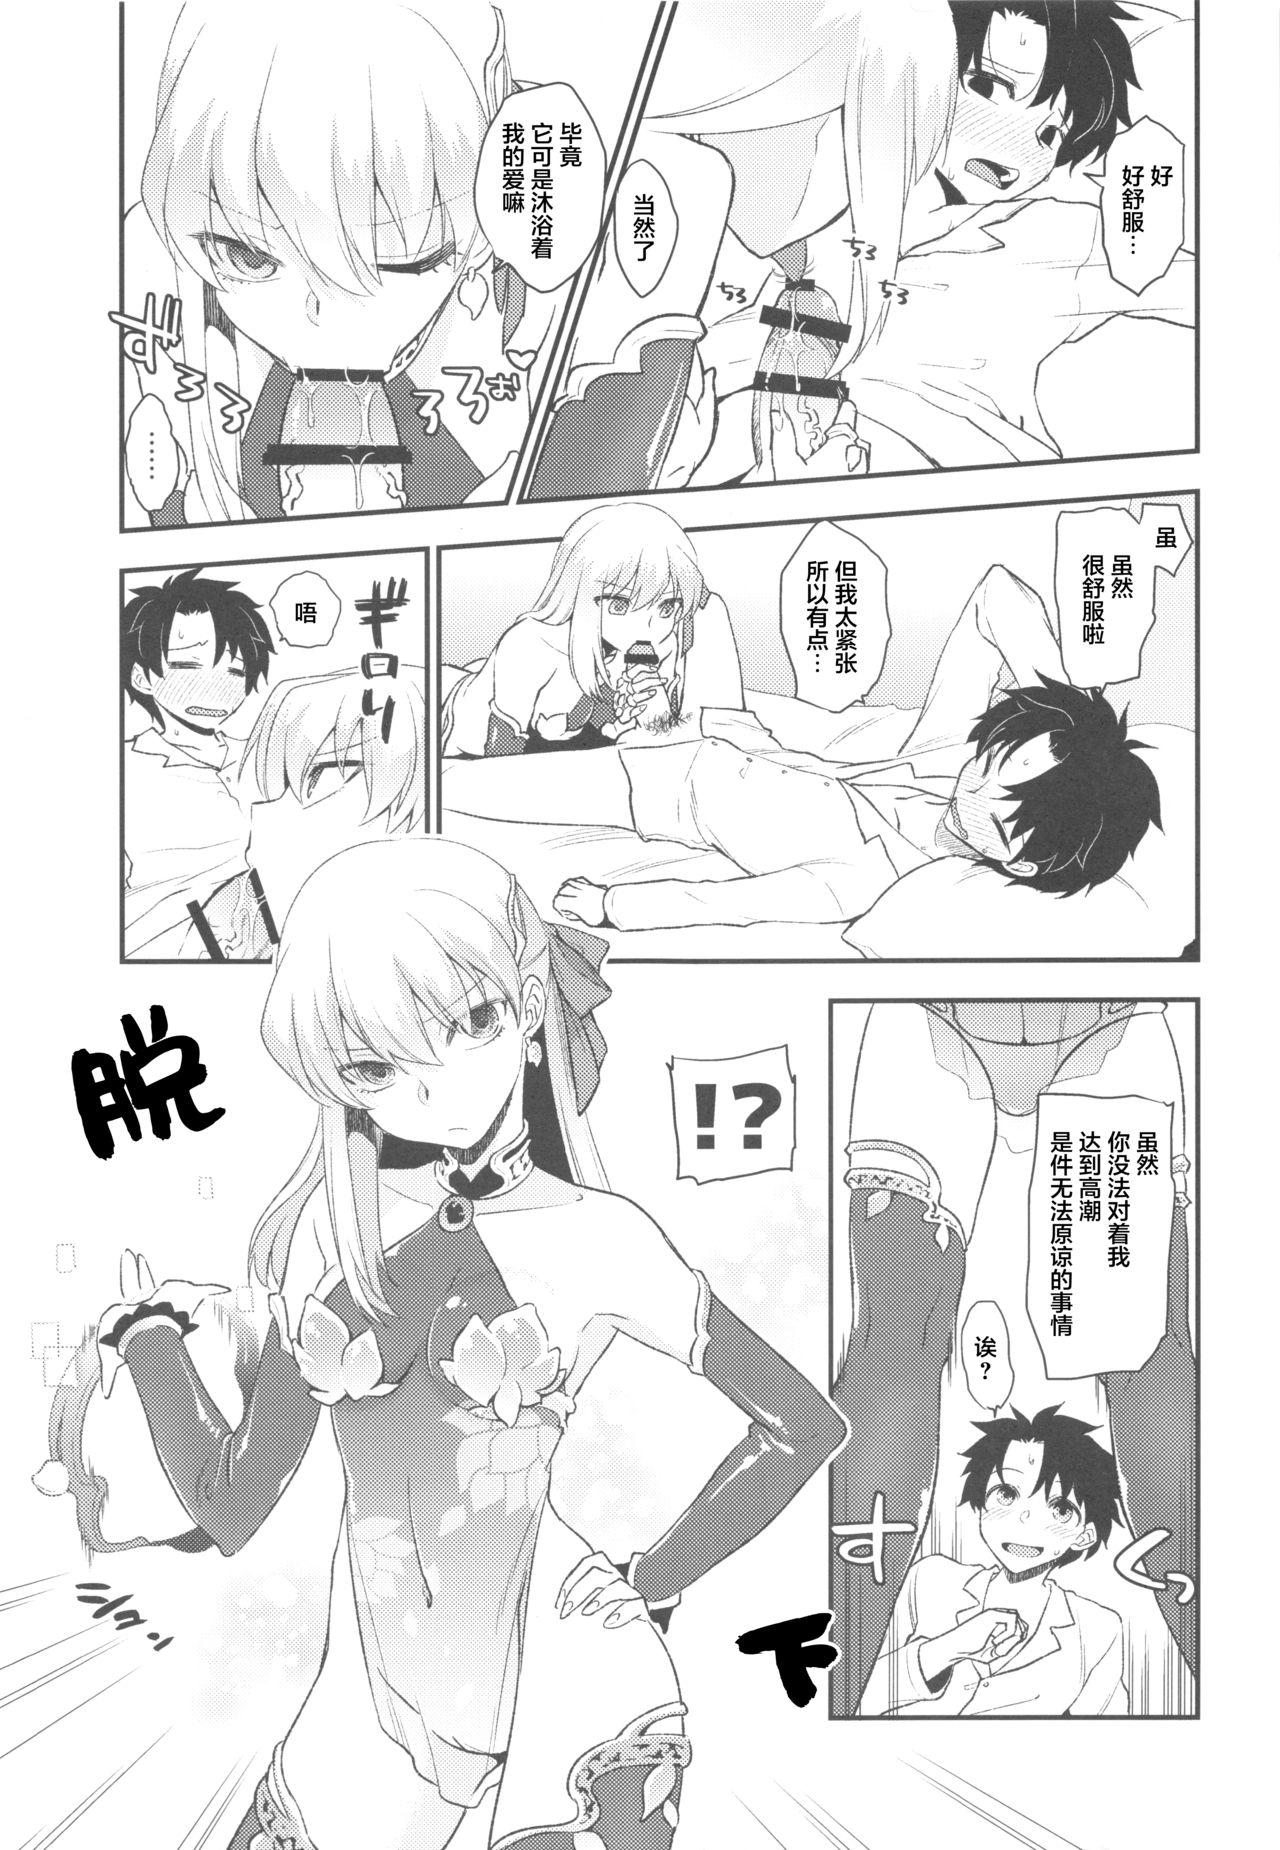 Whipping Shringarayoni - Fate grand order Metendo - Page 4